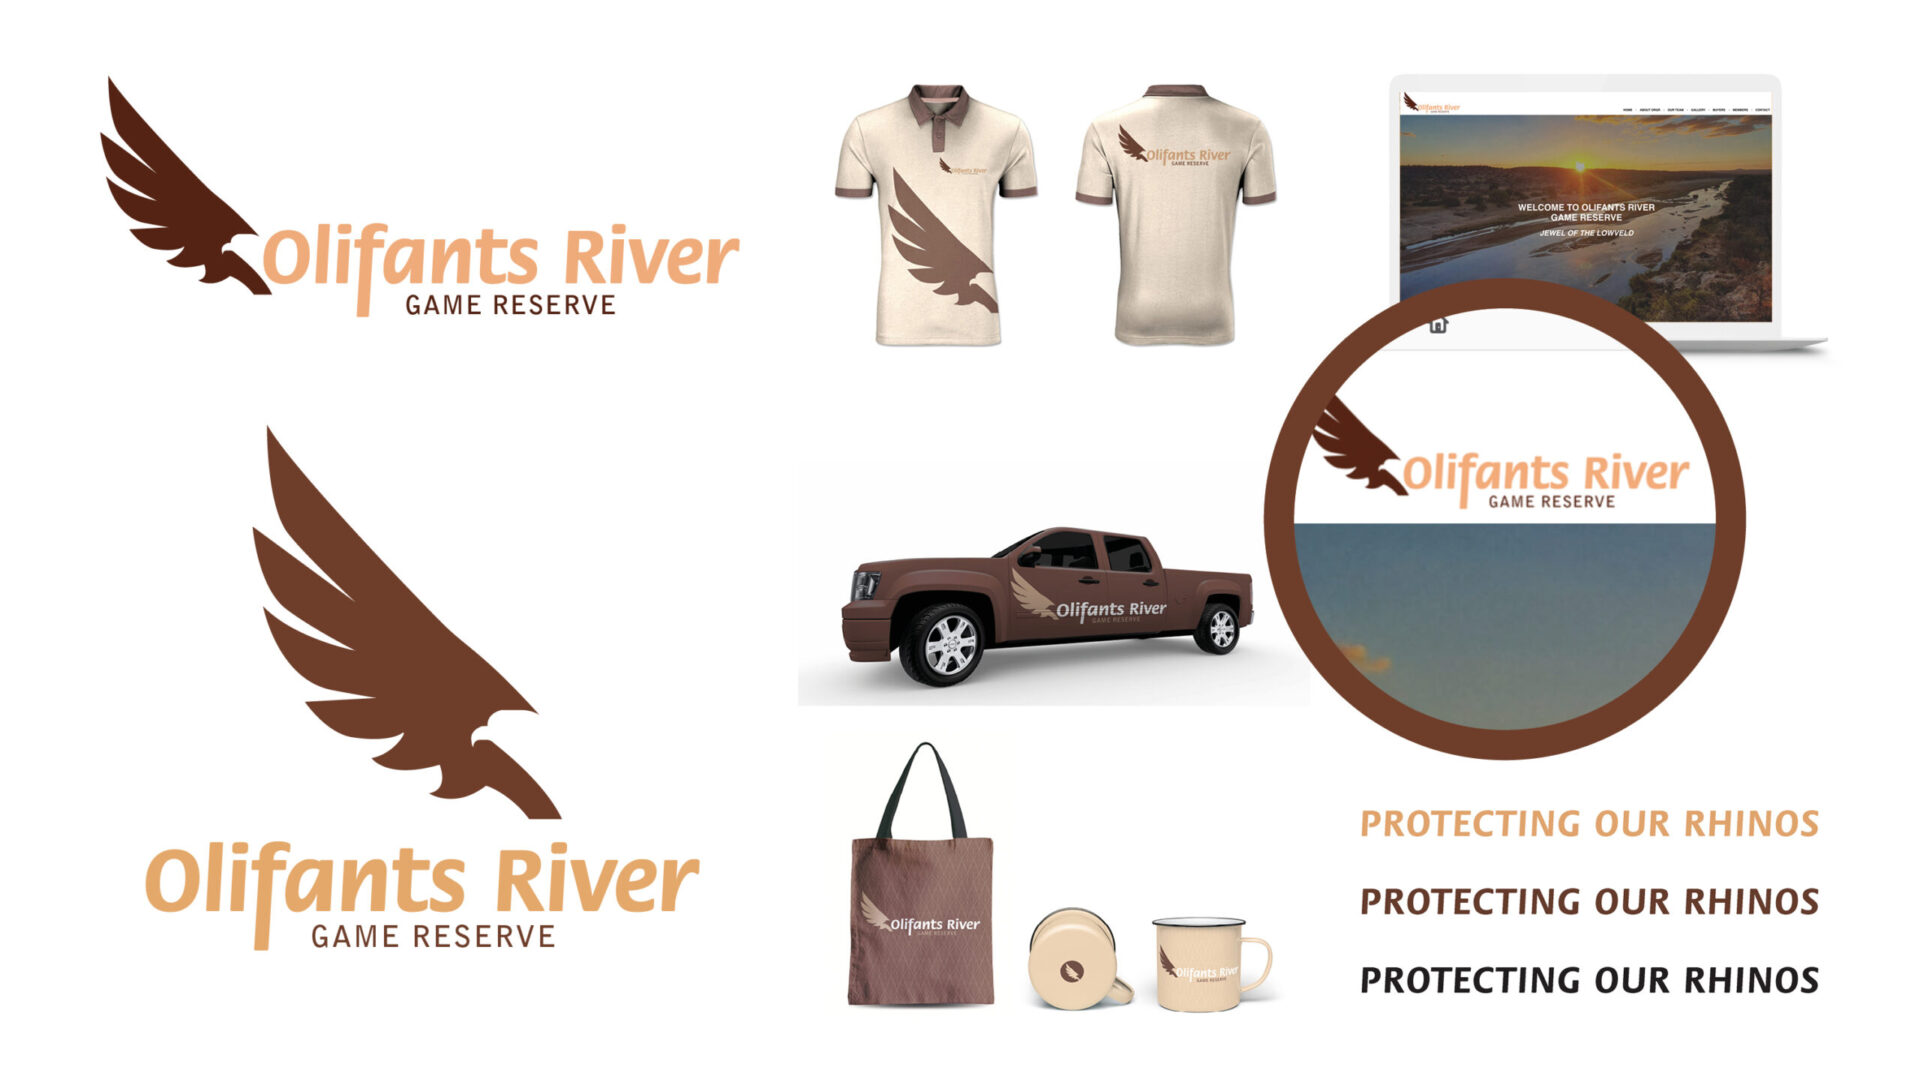 olifants river game reserve real estate corporate identity design